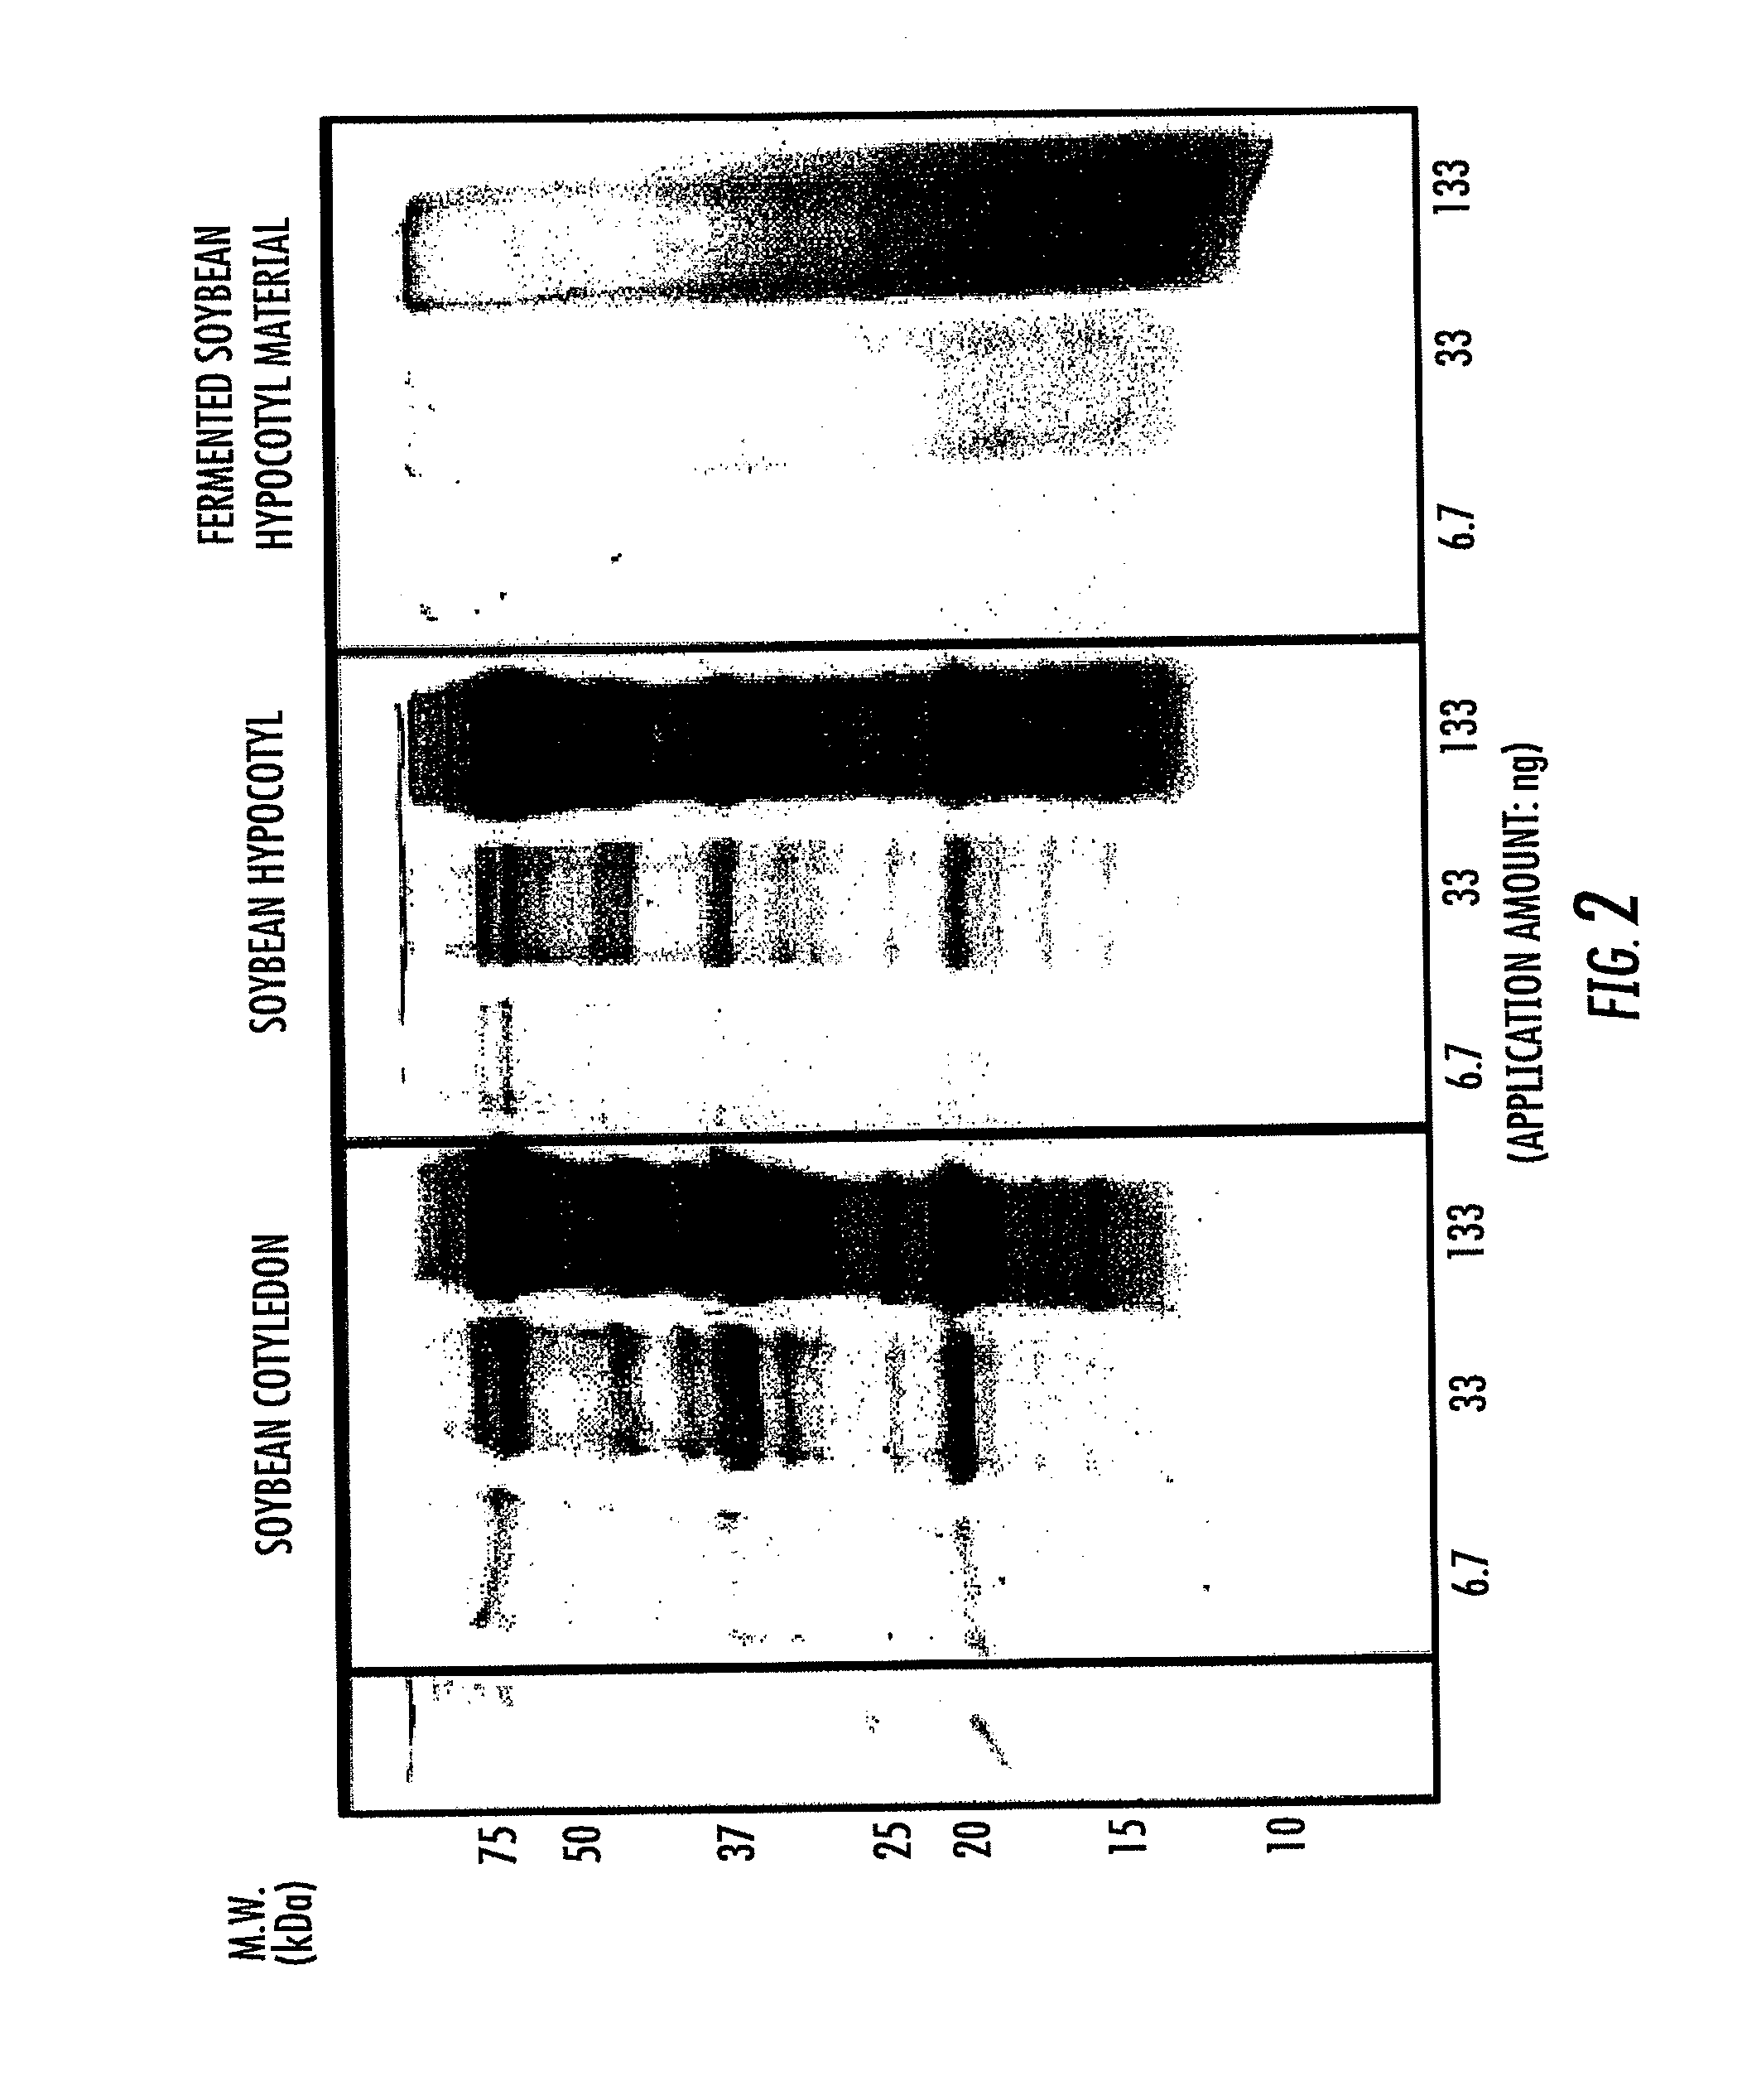 Equol-containing fermentation product of soybean embryonic axis, and method for production thereof